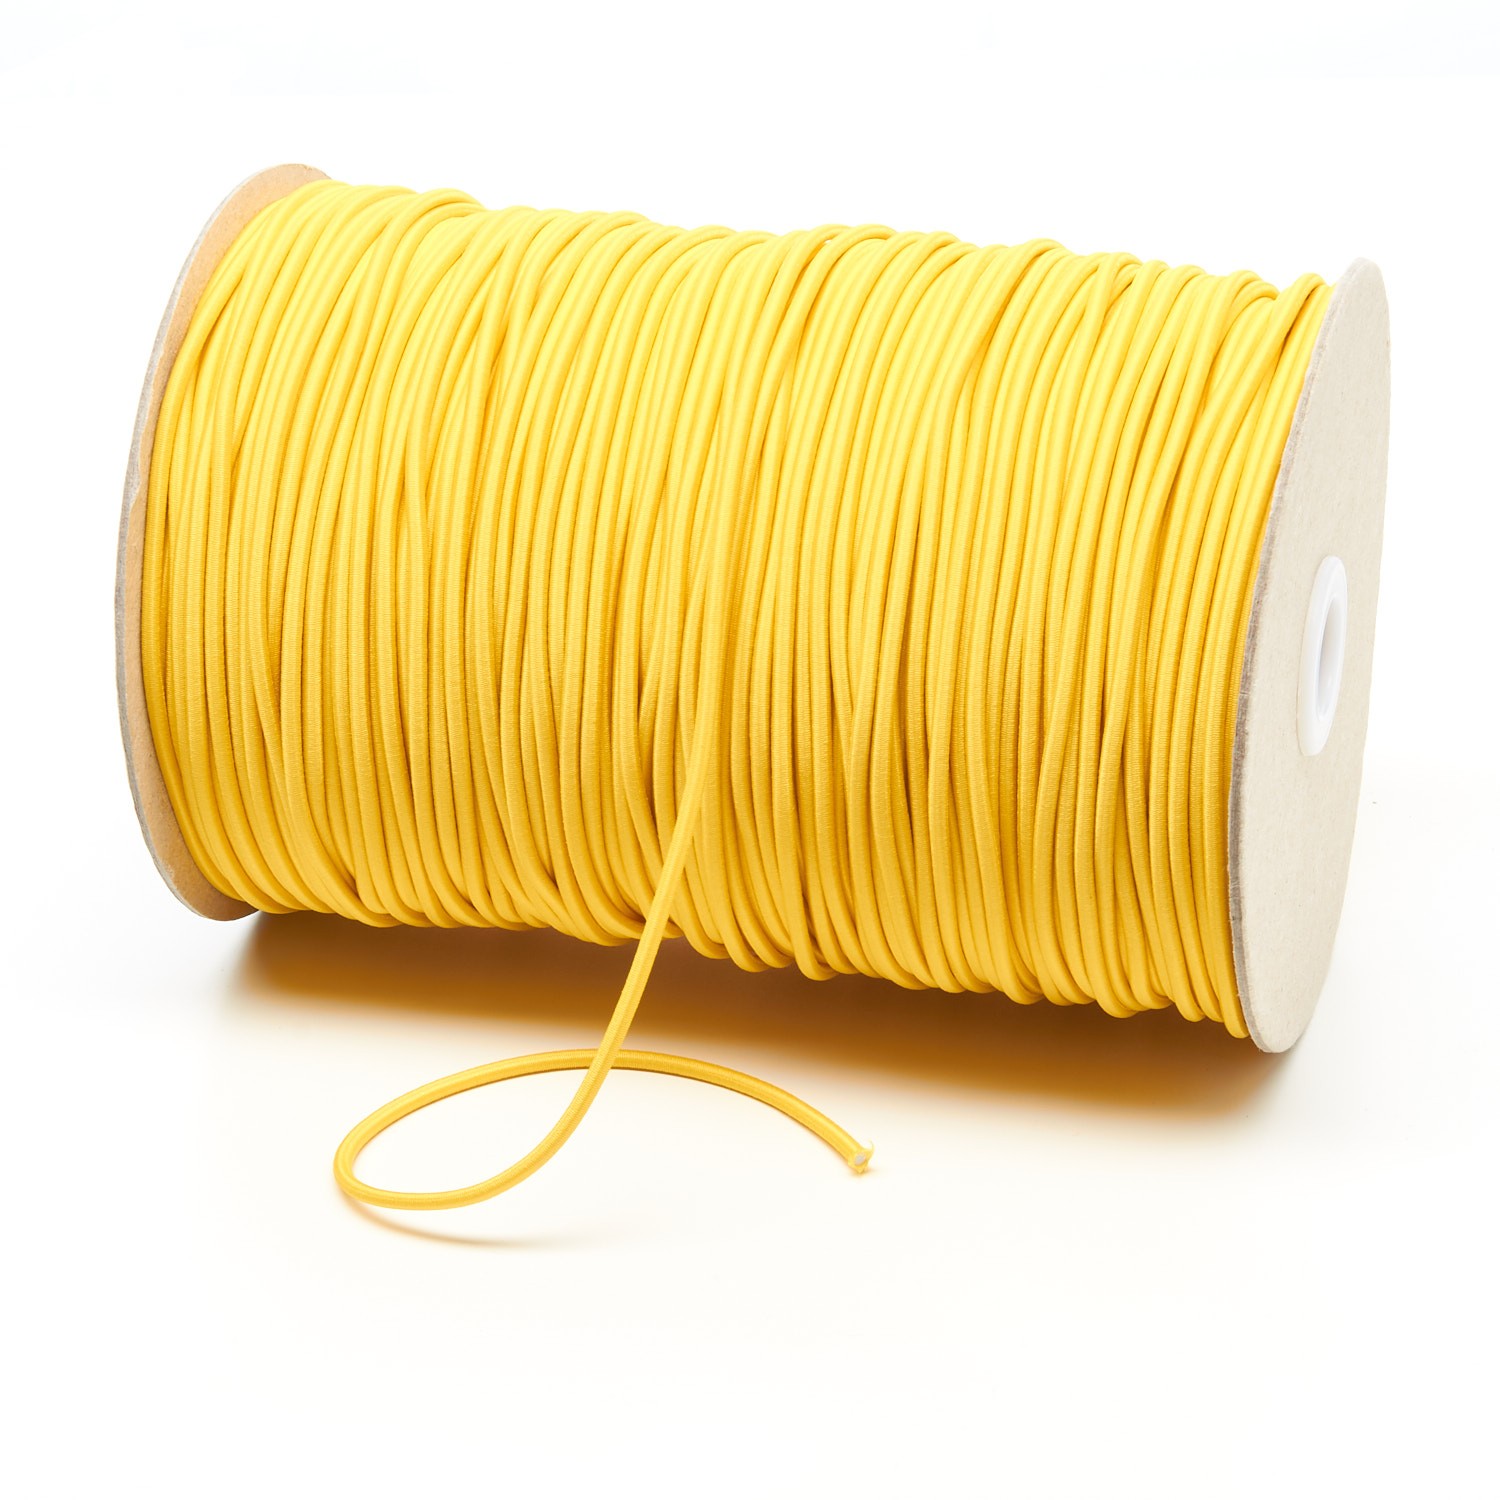 2mm Yellow Thin Fine Round Elastic Cord TPE84 Kalsi Cords